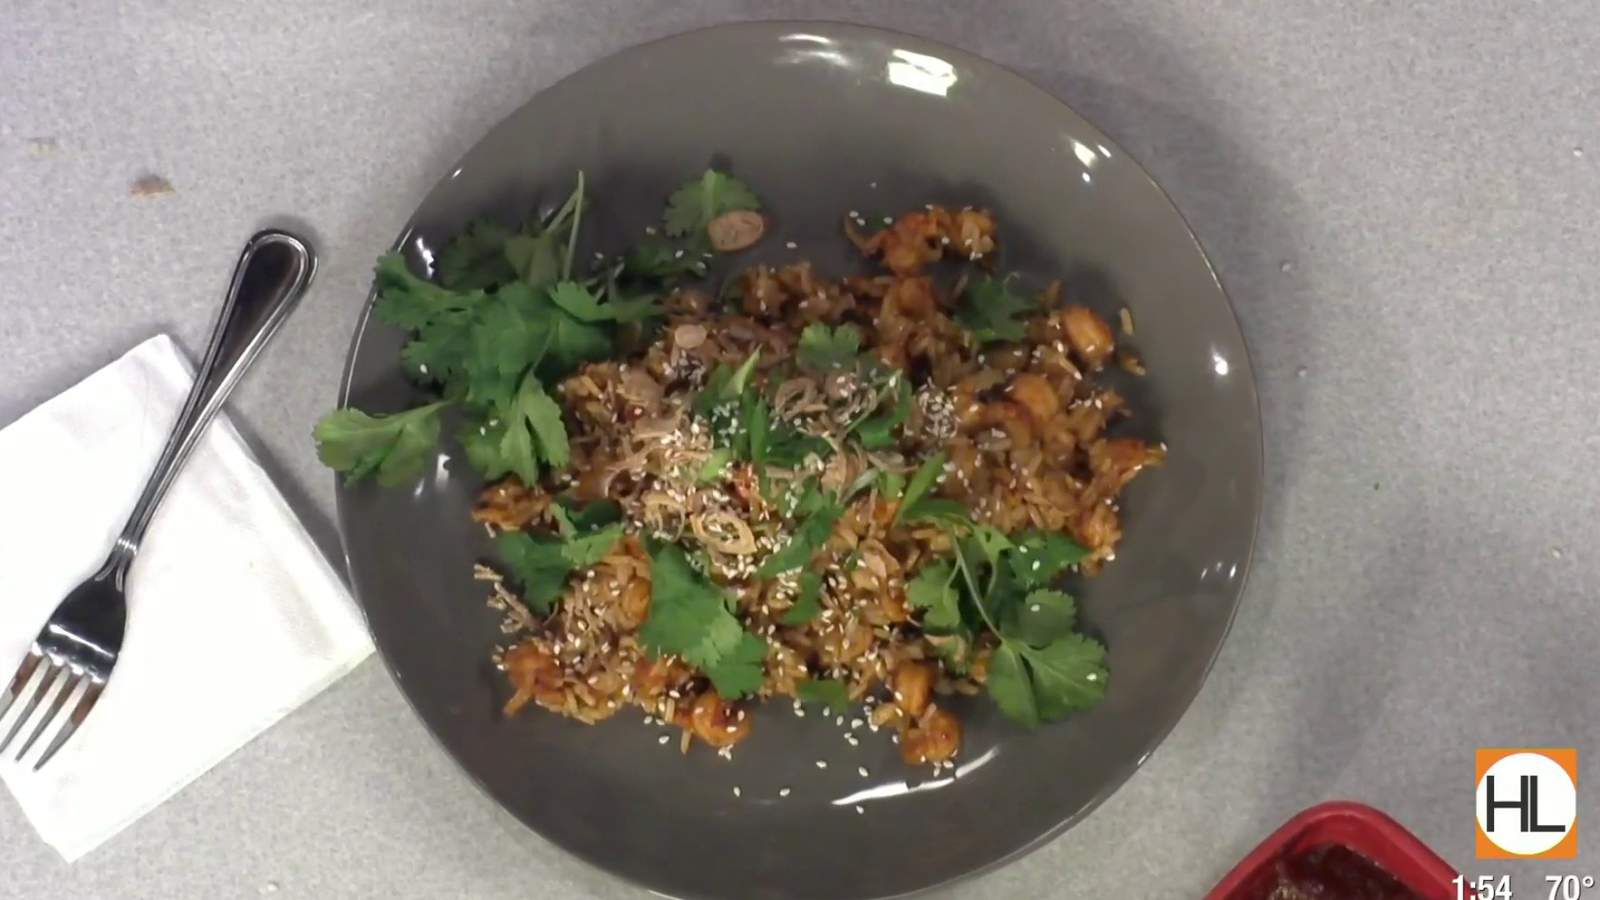 Get your crawfish fix with this easy crawfish fried rice recipe | HOUSTON LIFE | KPRC 2